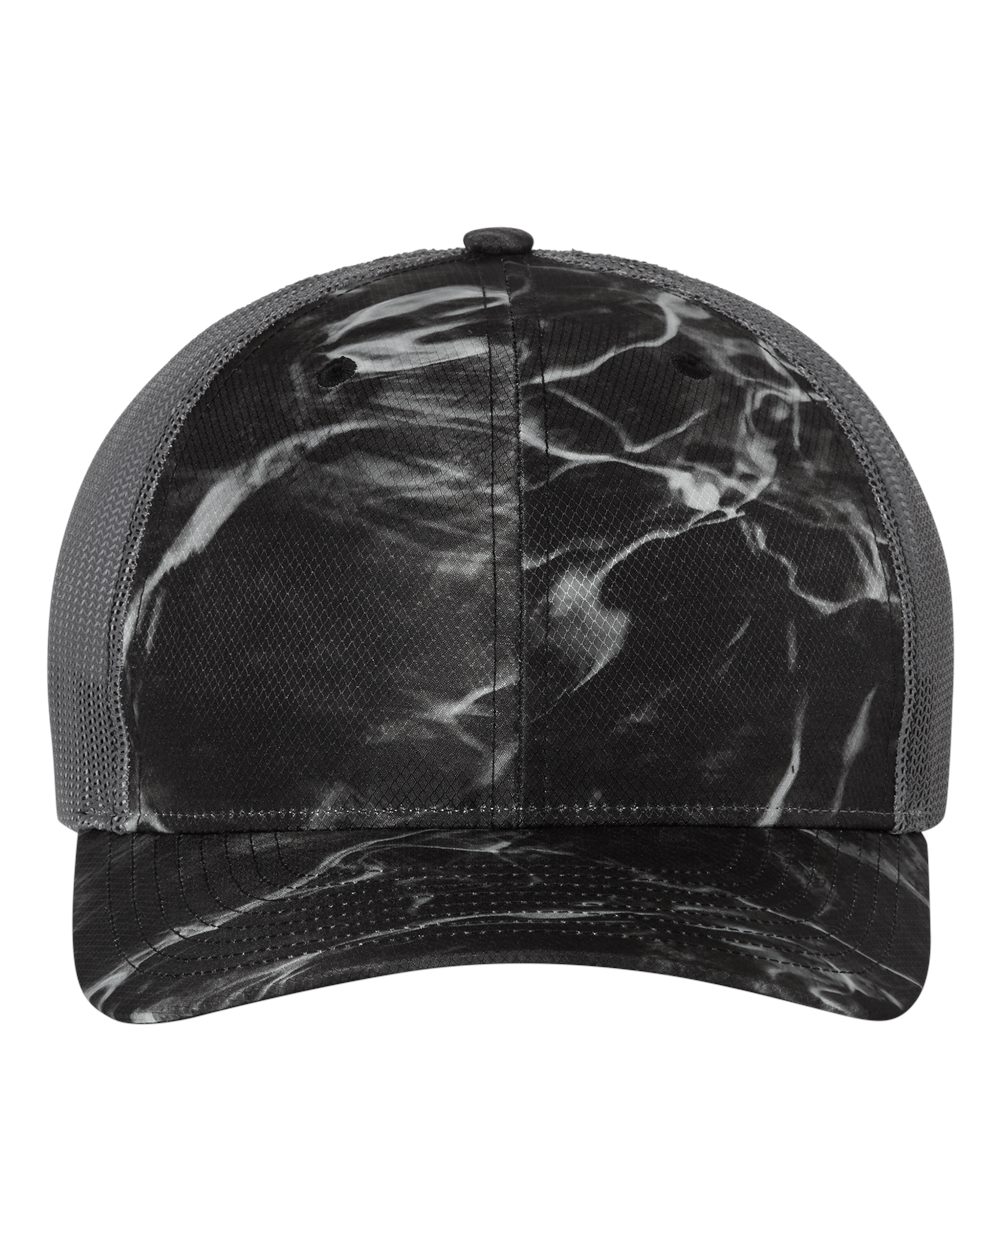 click to view Mossy Oak Elements Blacktip/ Charcoal